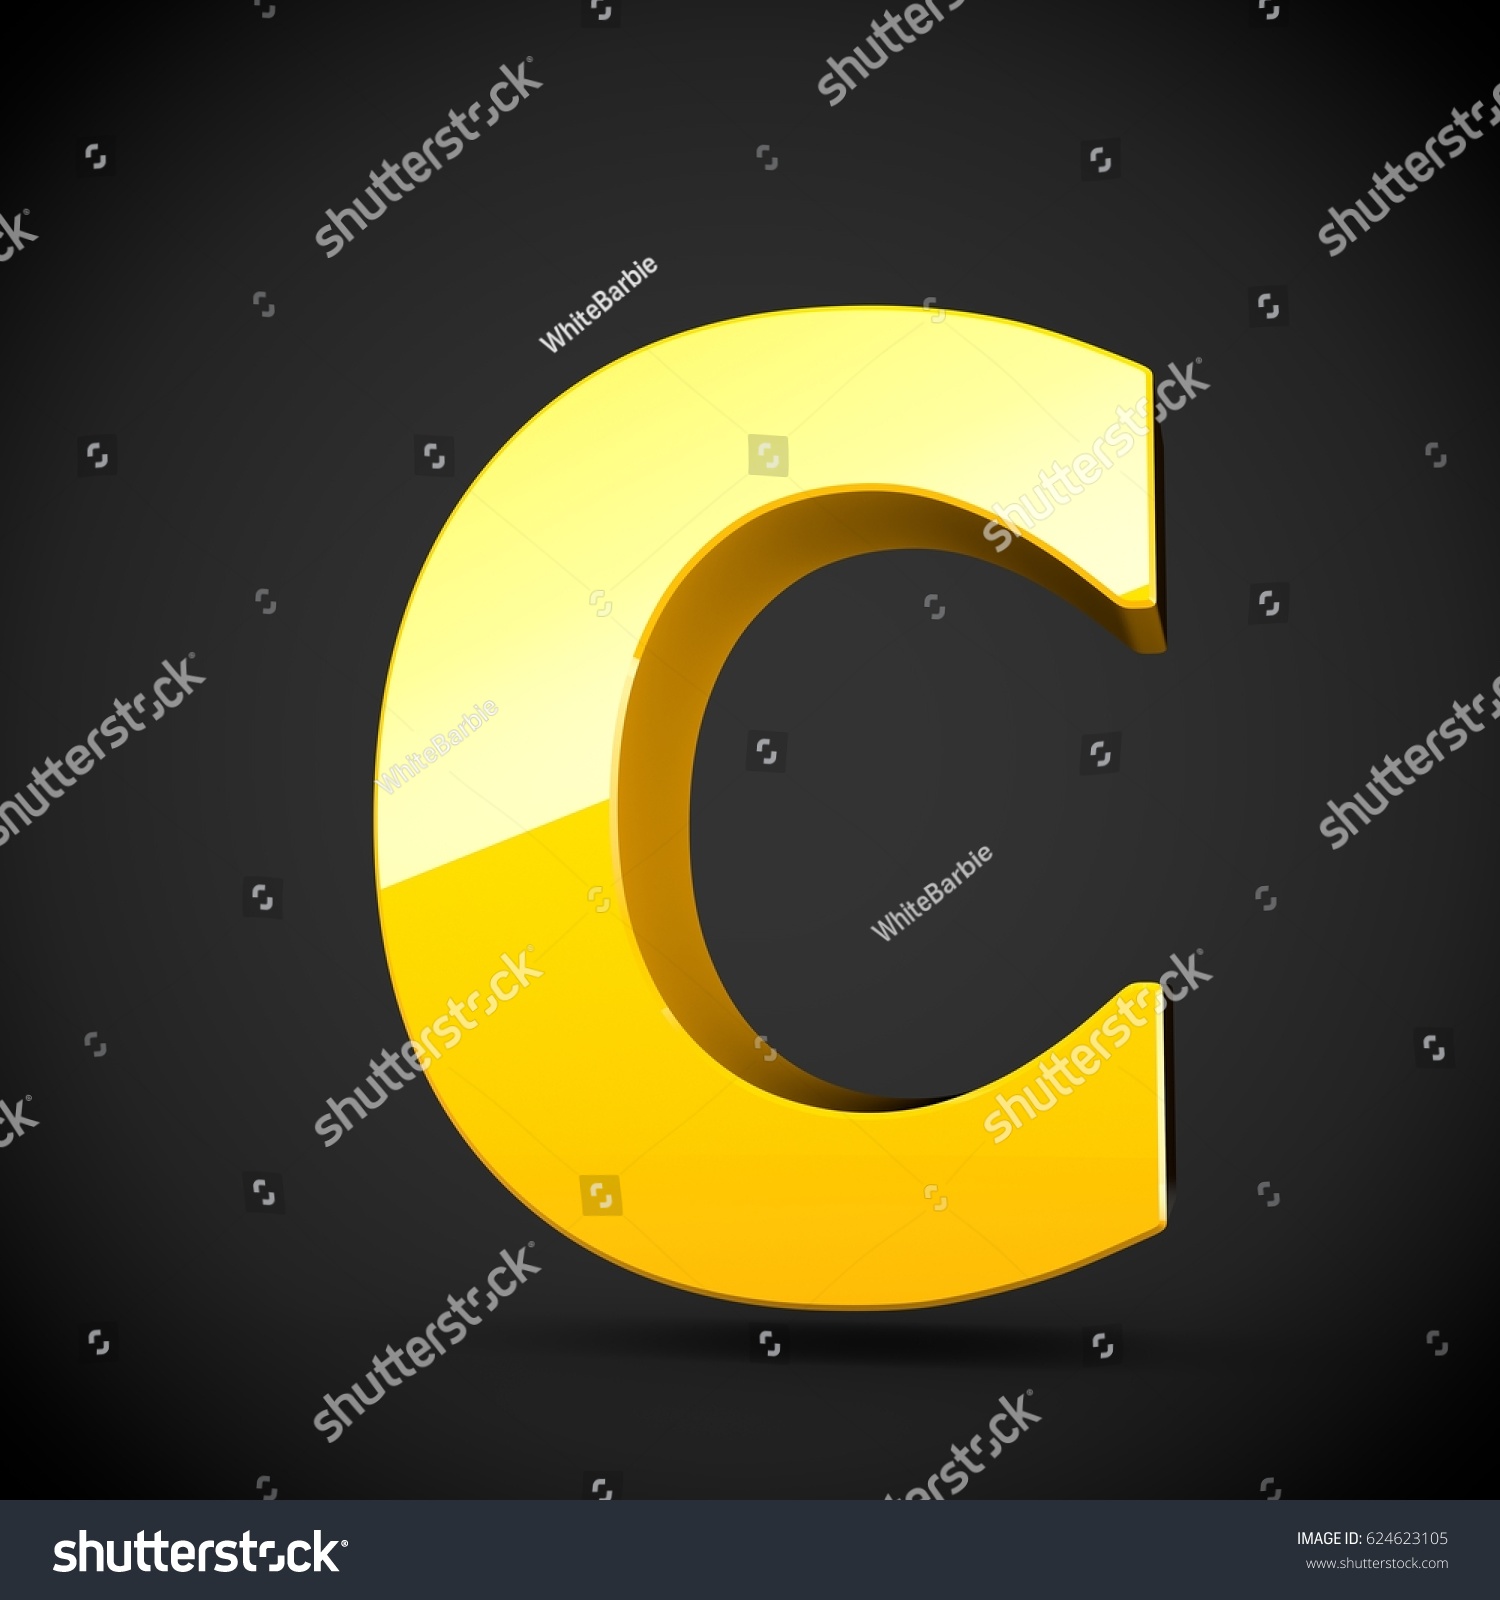 Download Glossy Yellow Paint Alphabet Letter C Stock Illustration 624623105 PSD Mockup Templates